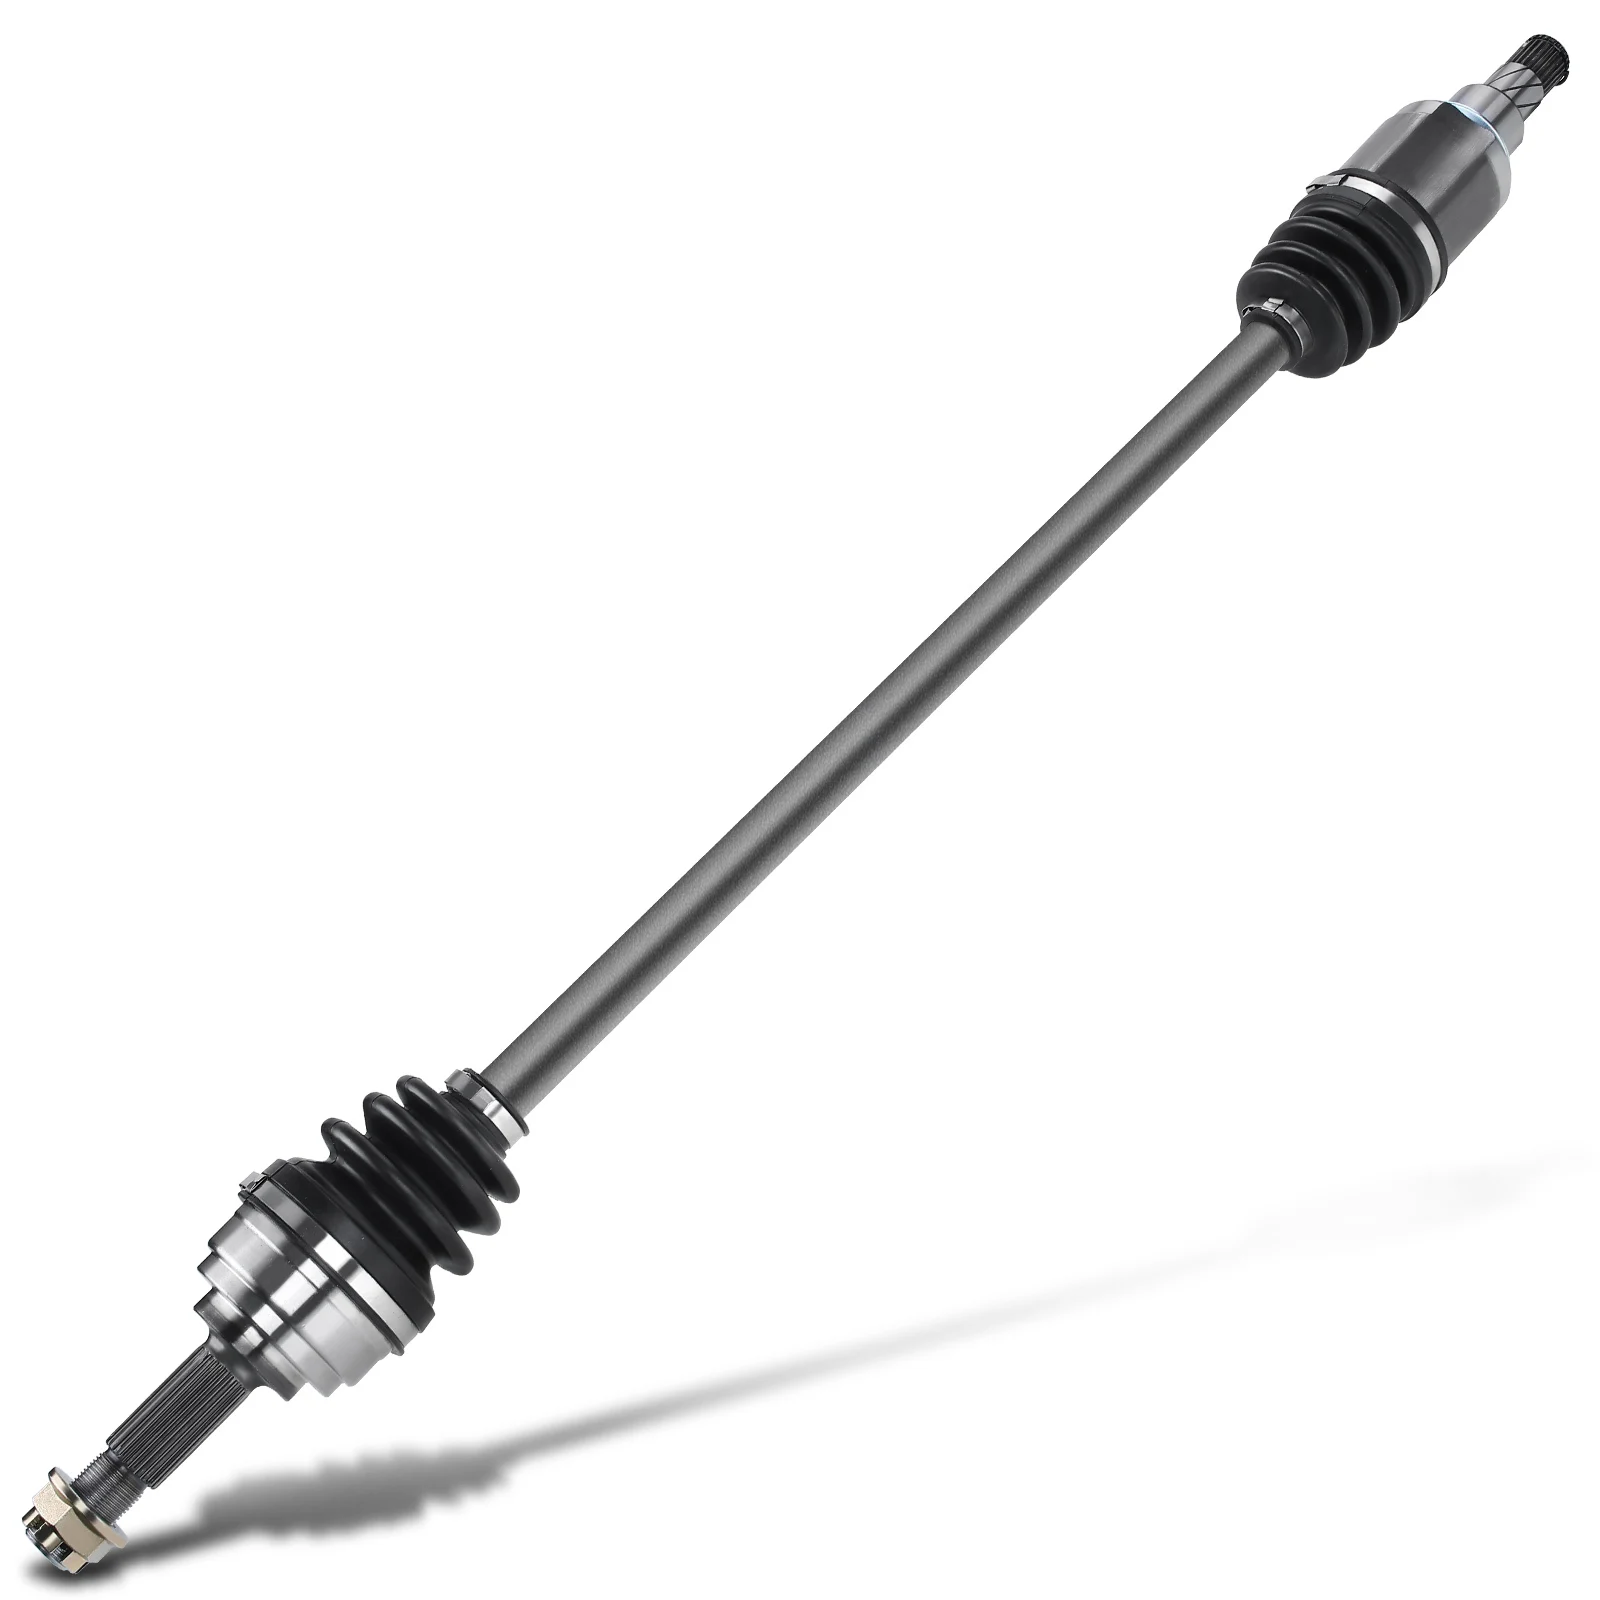 

In-stock CN US Front RH Passenger CV Axle Assembly for Nissan Versa 2012-2018 Versa Note 1.6L 391003AB0C